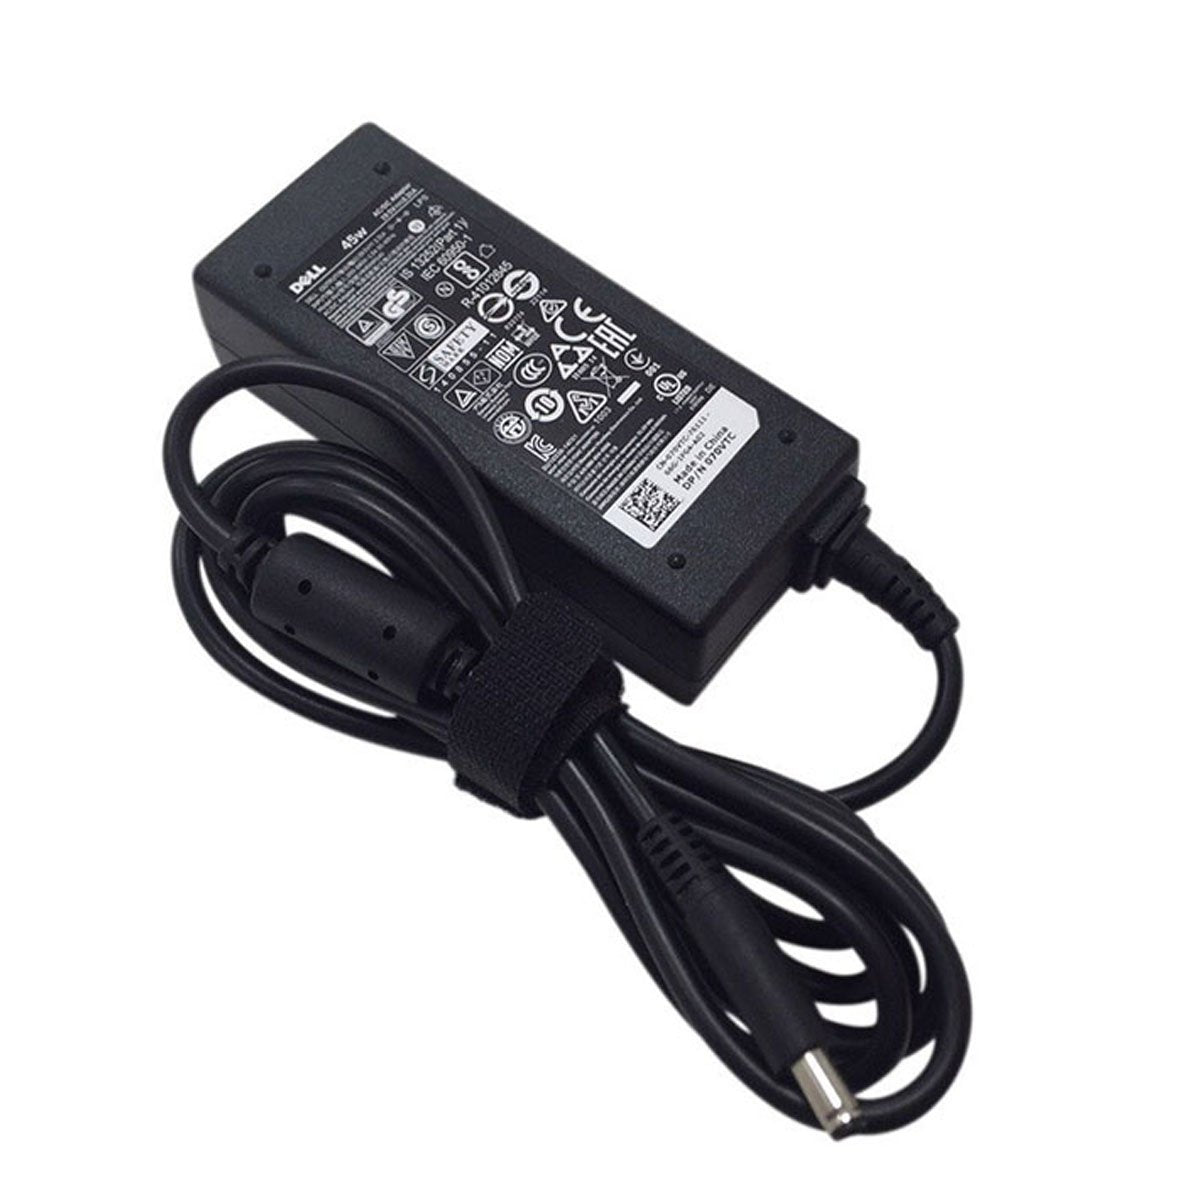 Dell Original 45W 19.5V 4.5mm Pin Laptop Charger Adapter for Inspiron 13 7353 With Power Cord